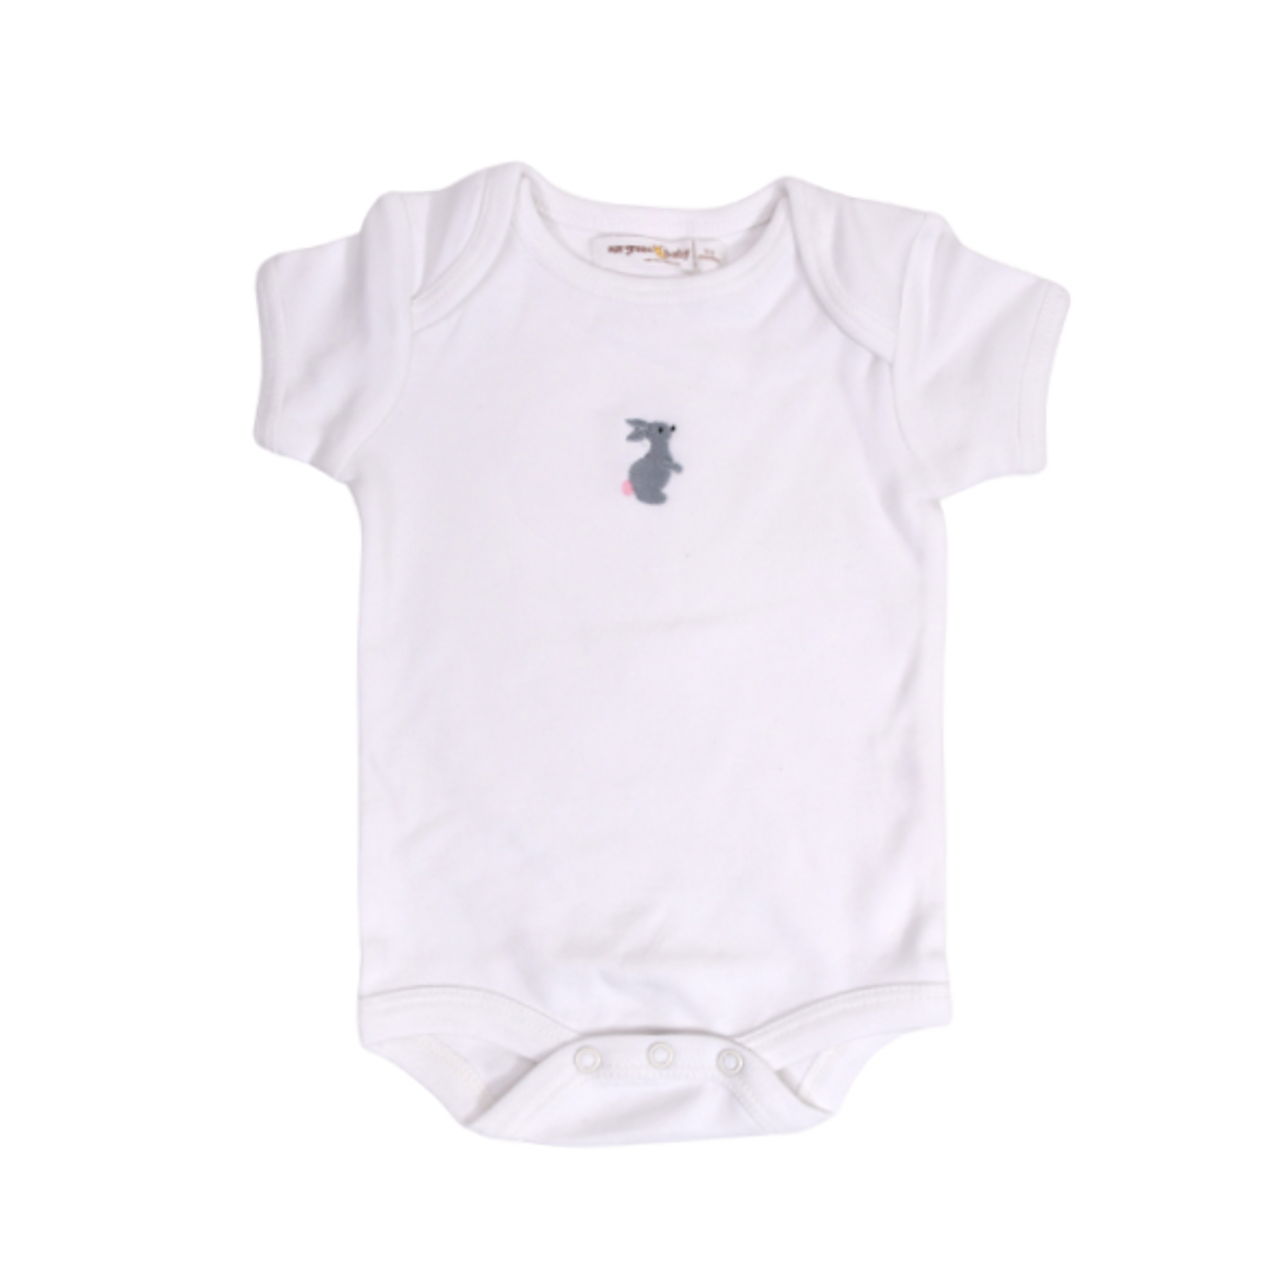 Organic Baby Onesie - Embroidered Bunny